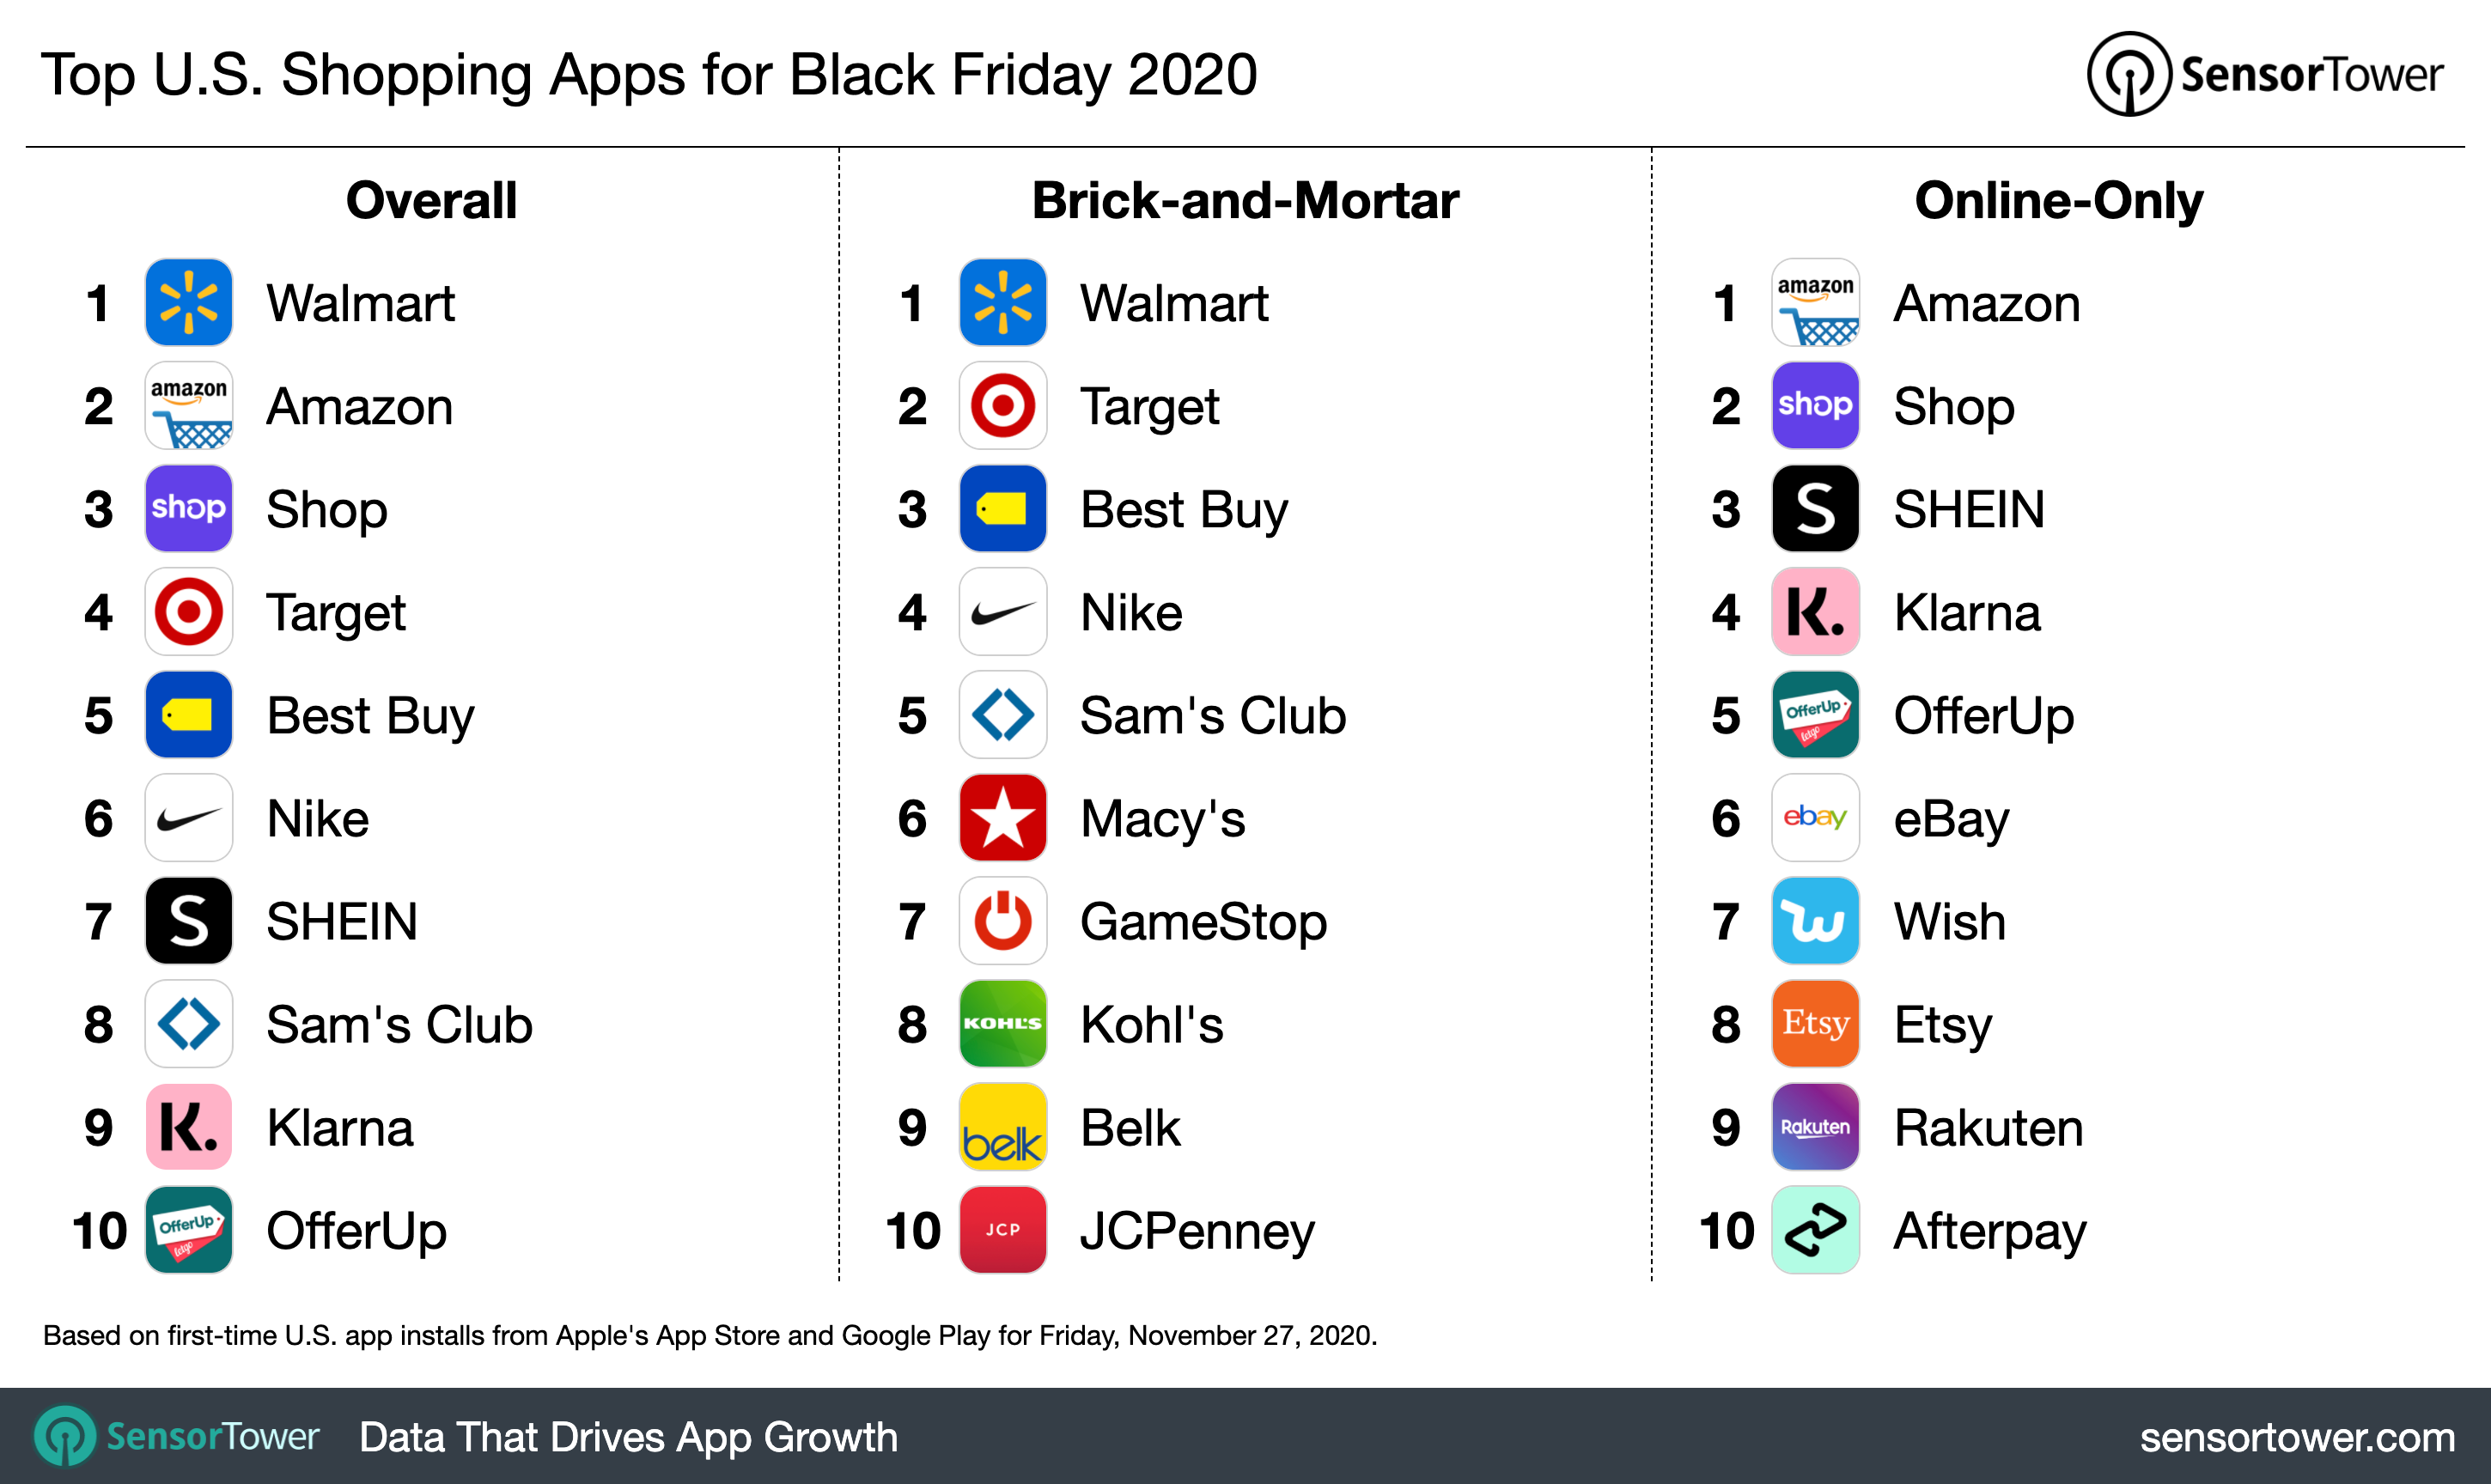 Half of the top 10 shopping apps in the U.S. were B&M this Black Friday